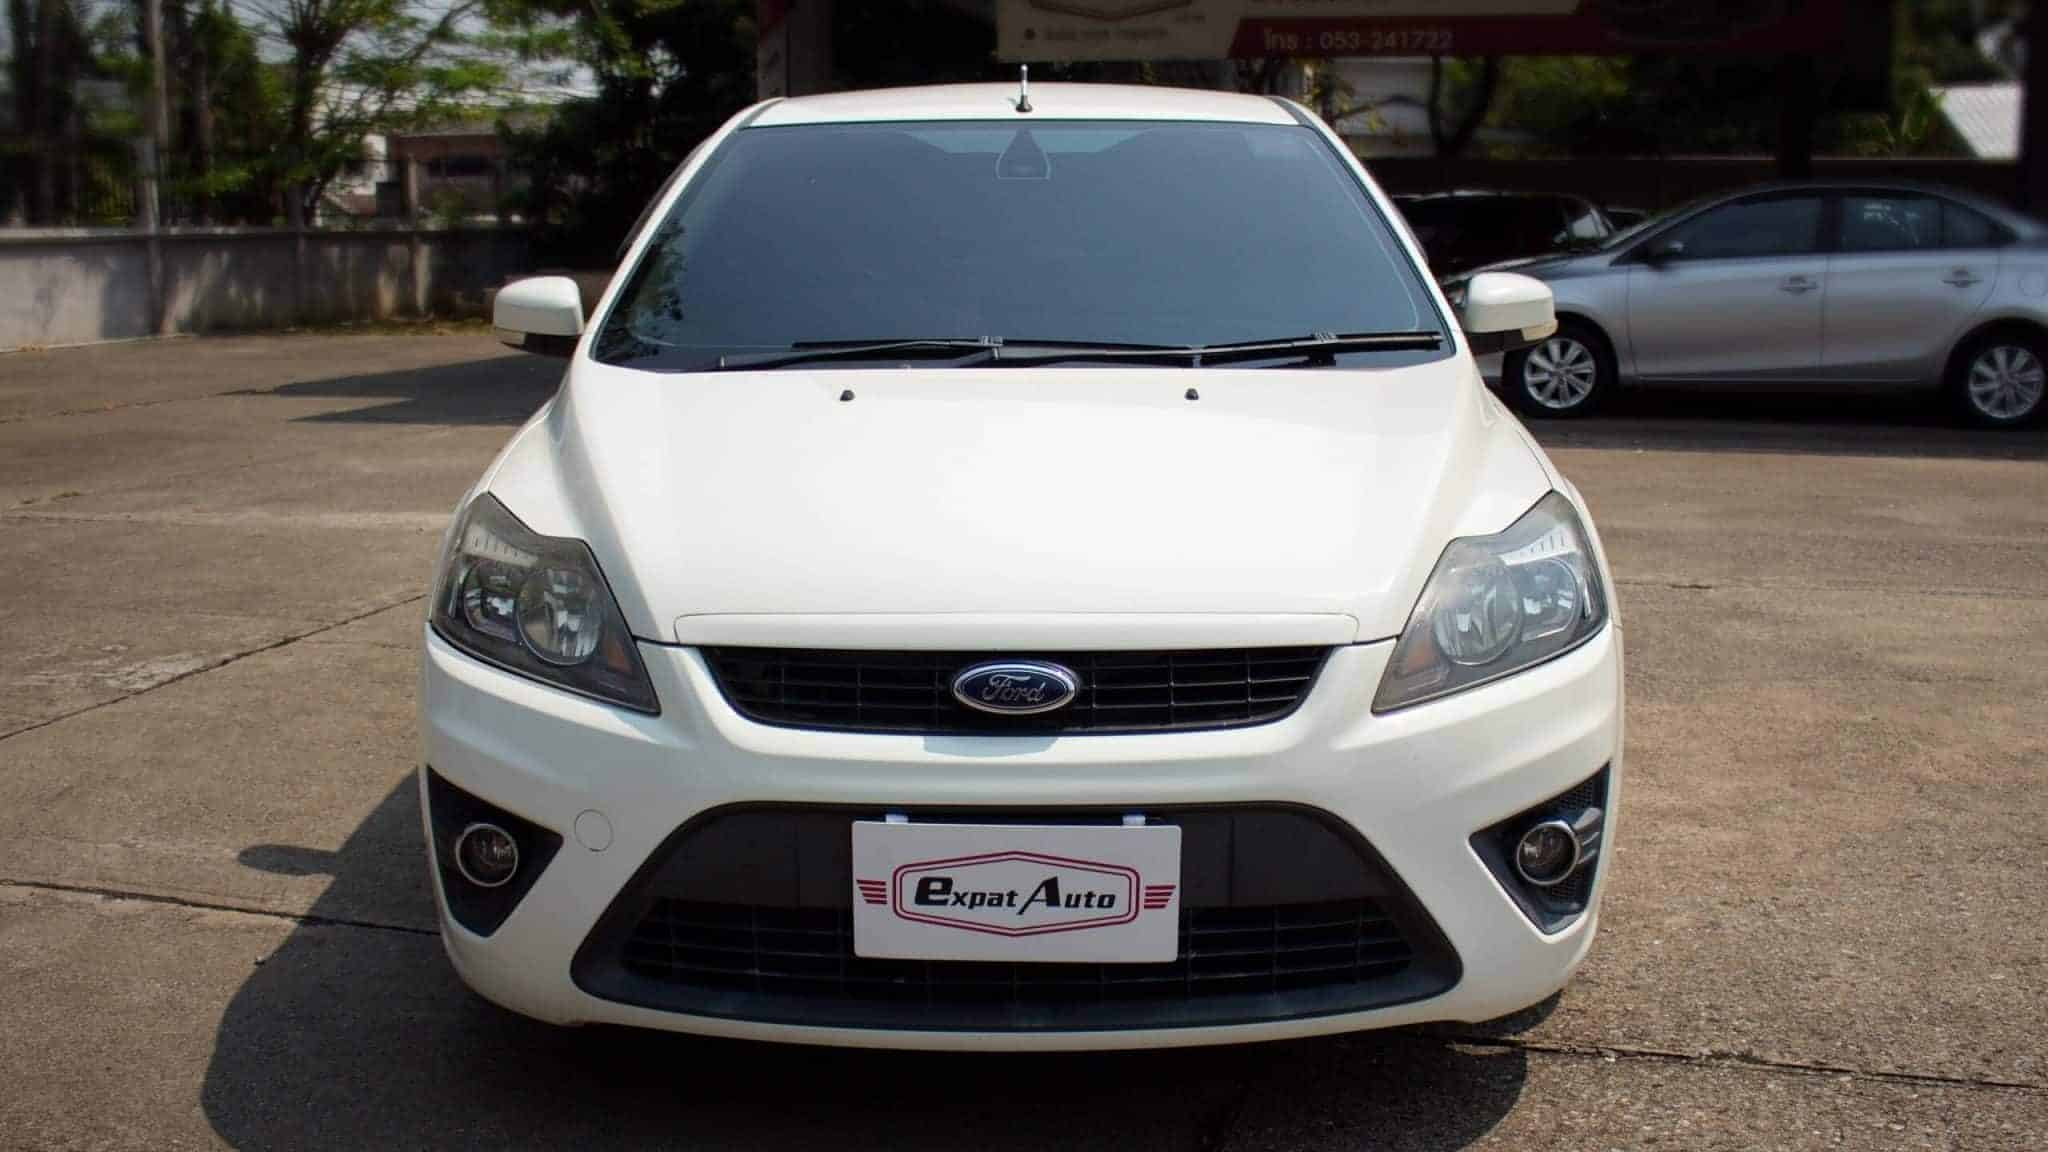 2012(MY11) Ford Focus 2.0 Sport A/T full